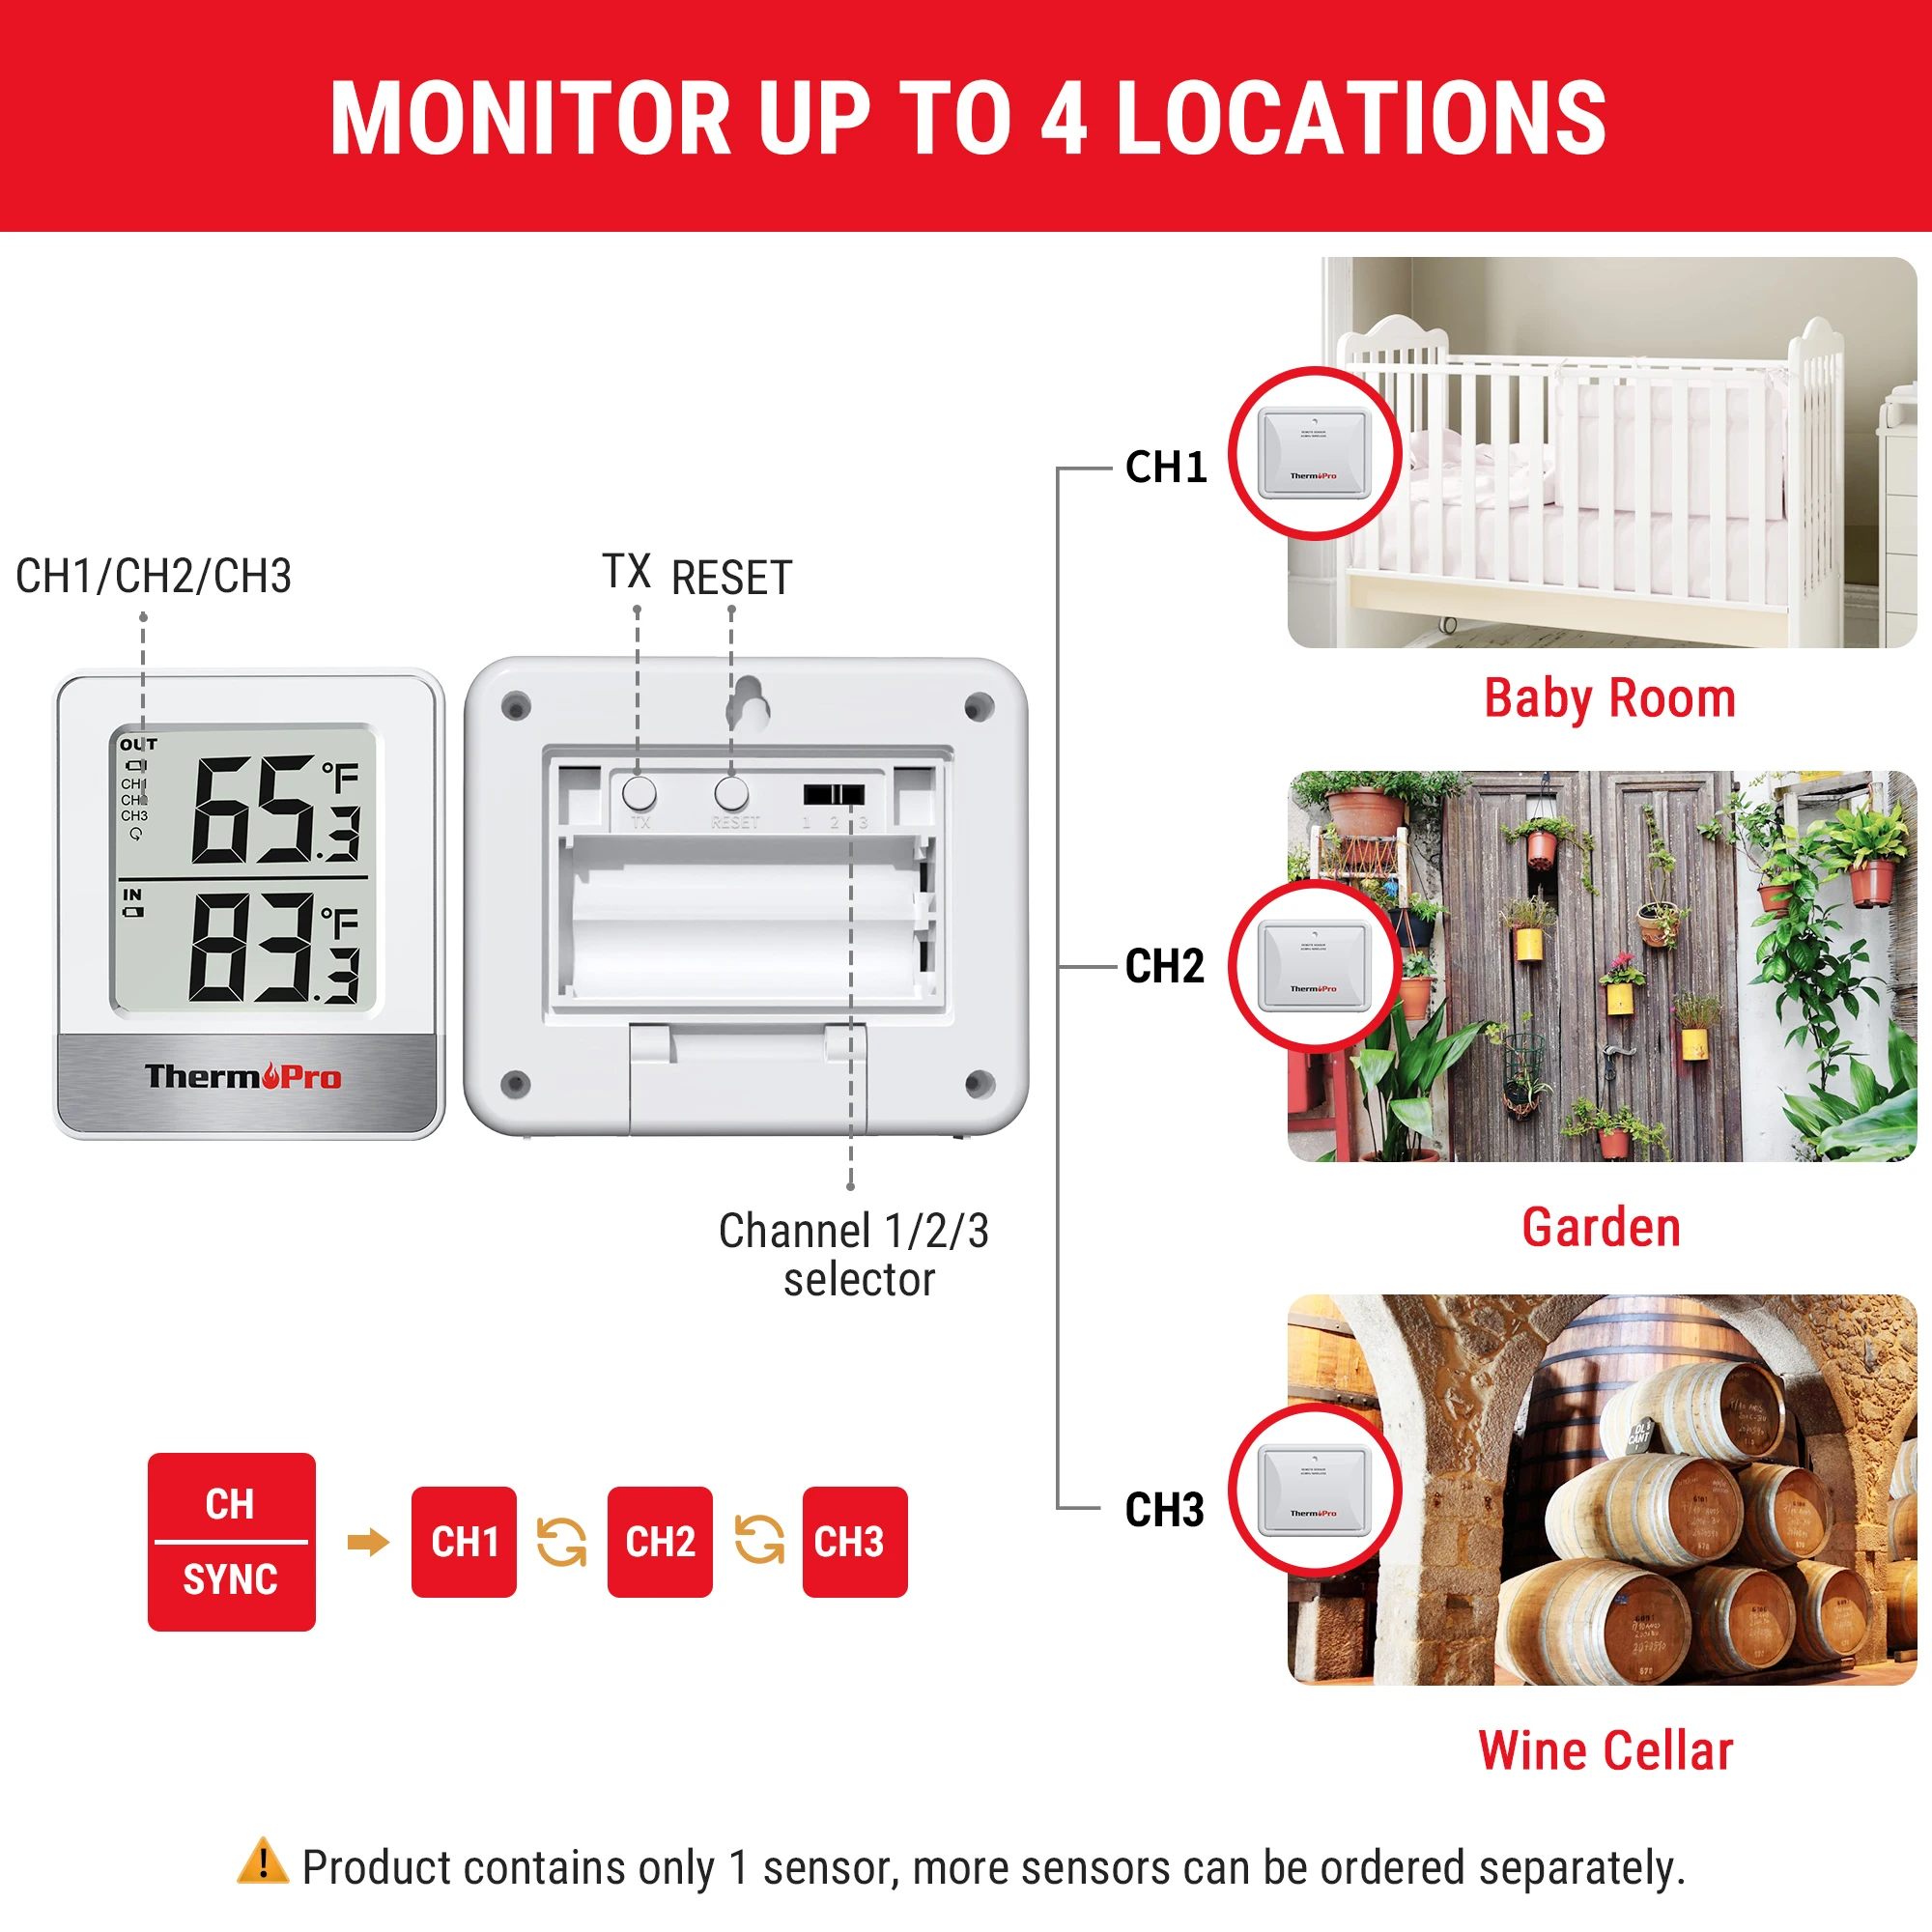 https://ae01.alicdn.com/kf/Ae26468074a1a46b6bad1119c321bffd2M/ThermoPro-TP200B-150M-Remote-Range-Wireless-Digital-Indoor-Outdoor-Household-Thermometer-For-Home-Temperature-Monitor.jpg